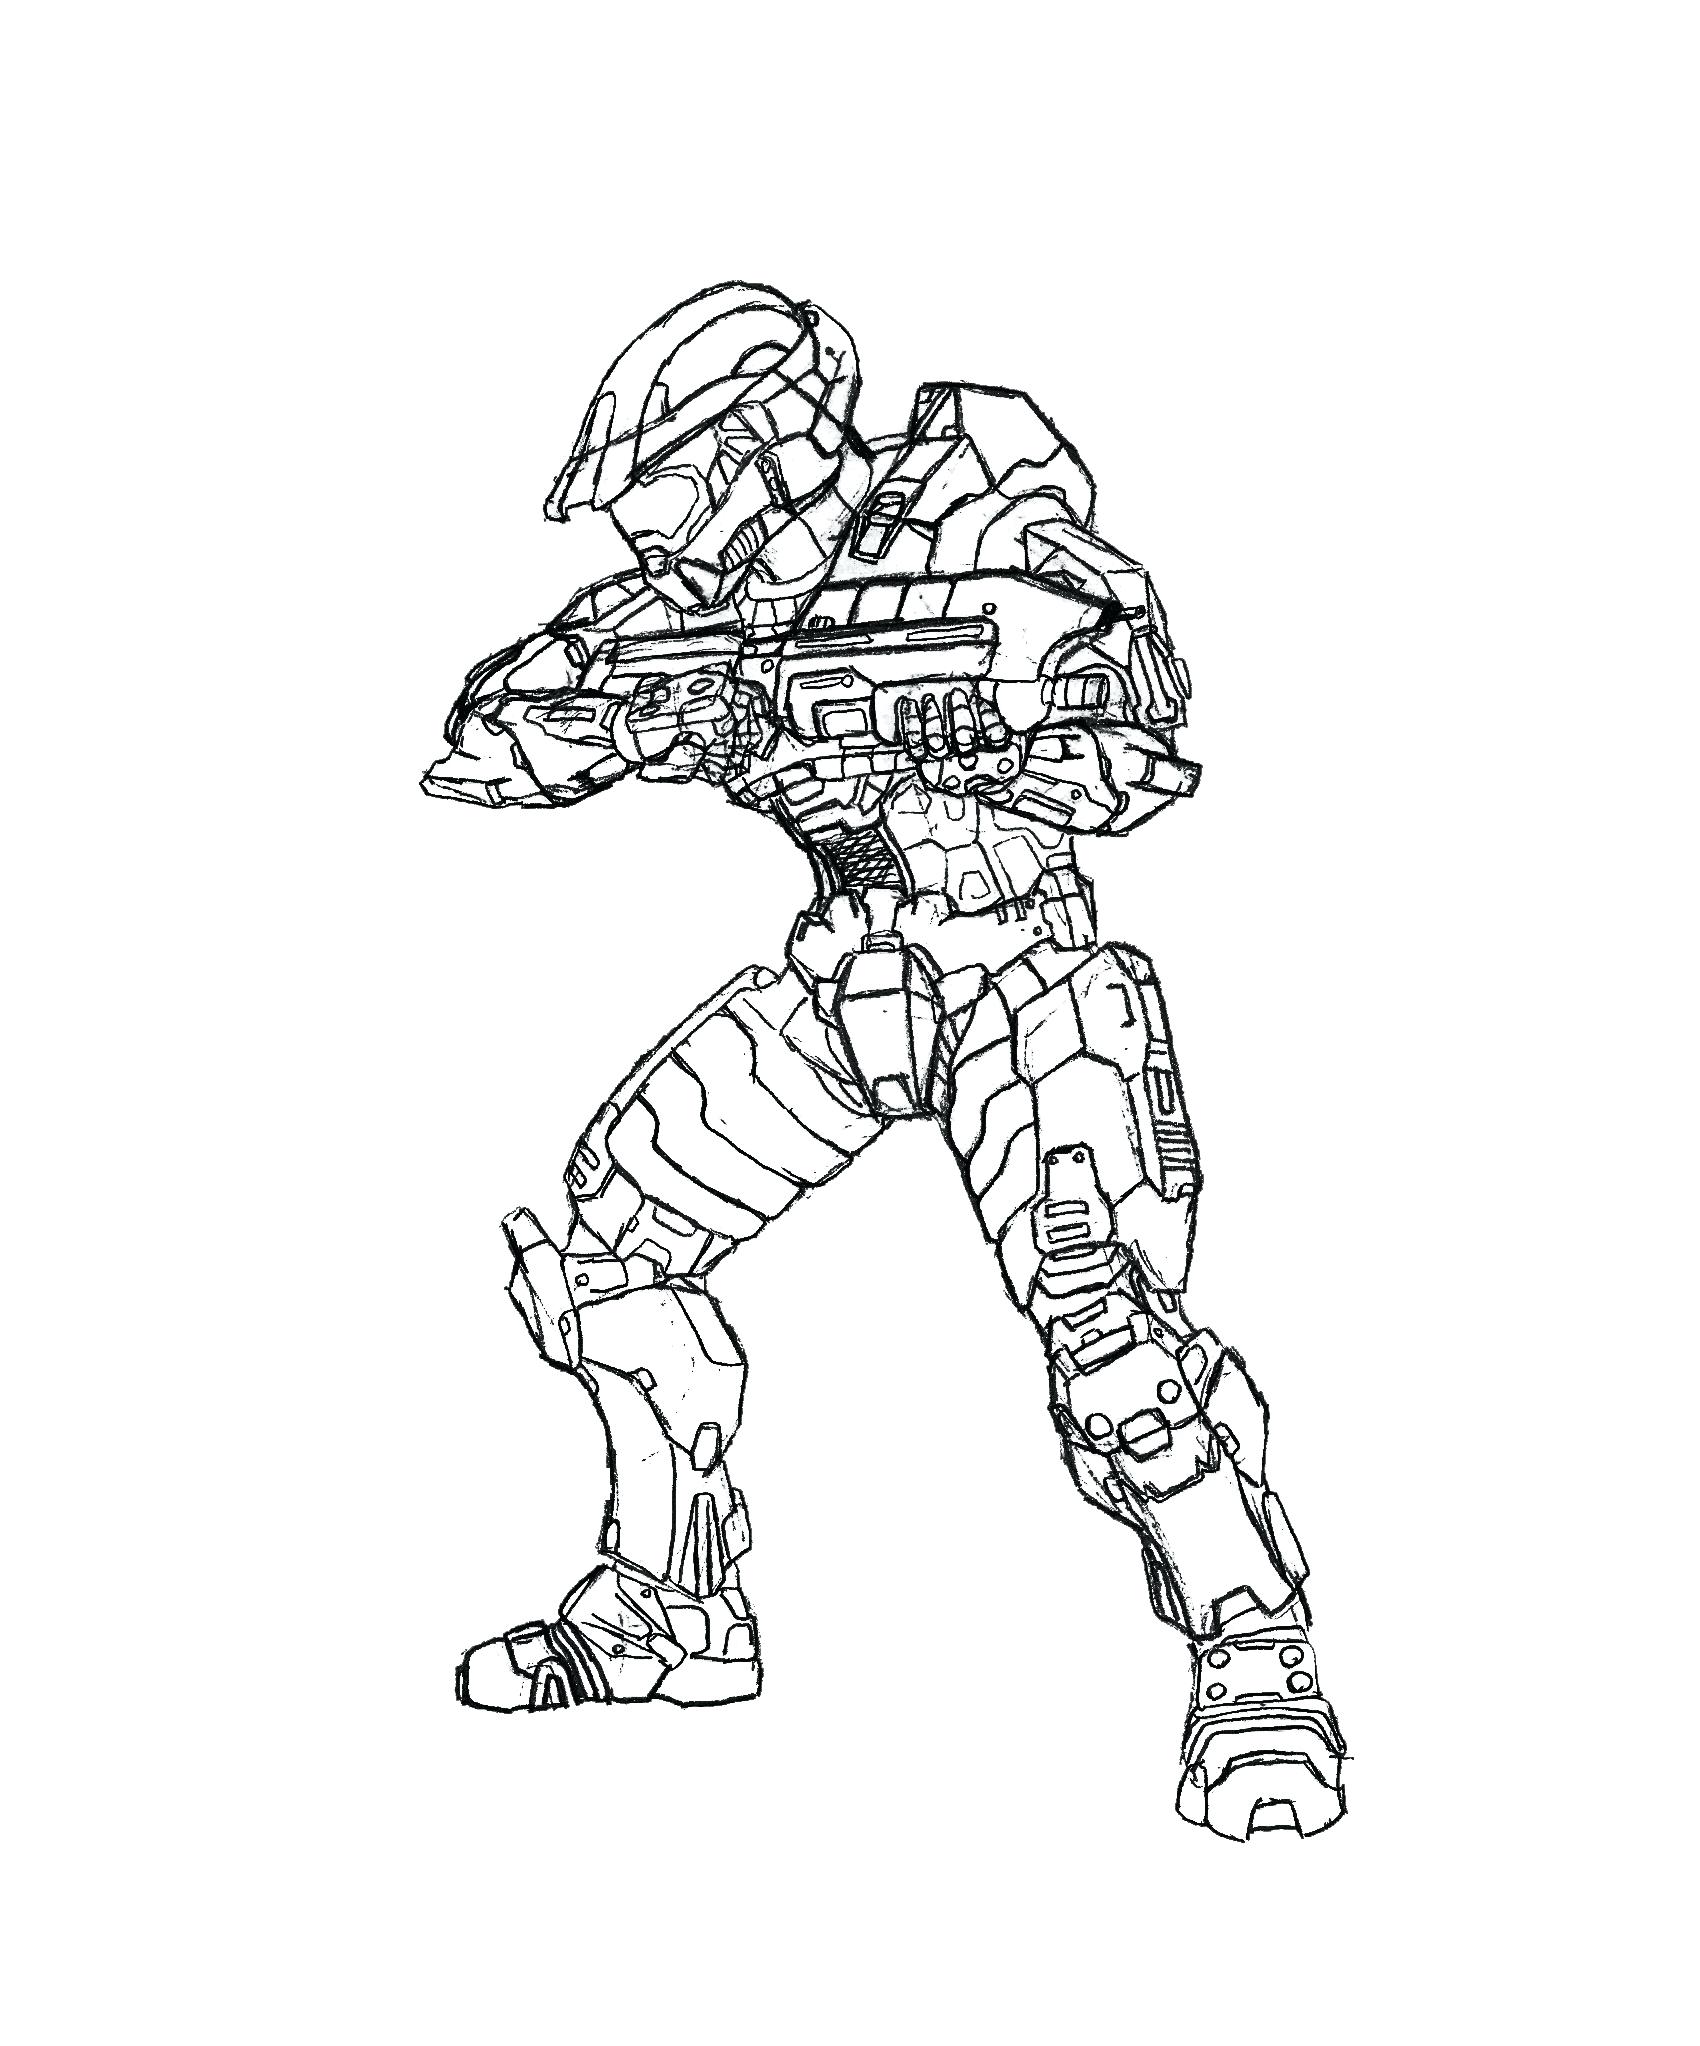 Halo Spartan Coloring Pages at GetColorings.com | Free printable ...